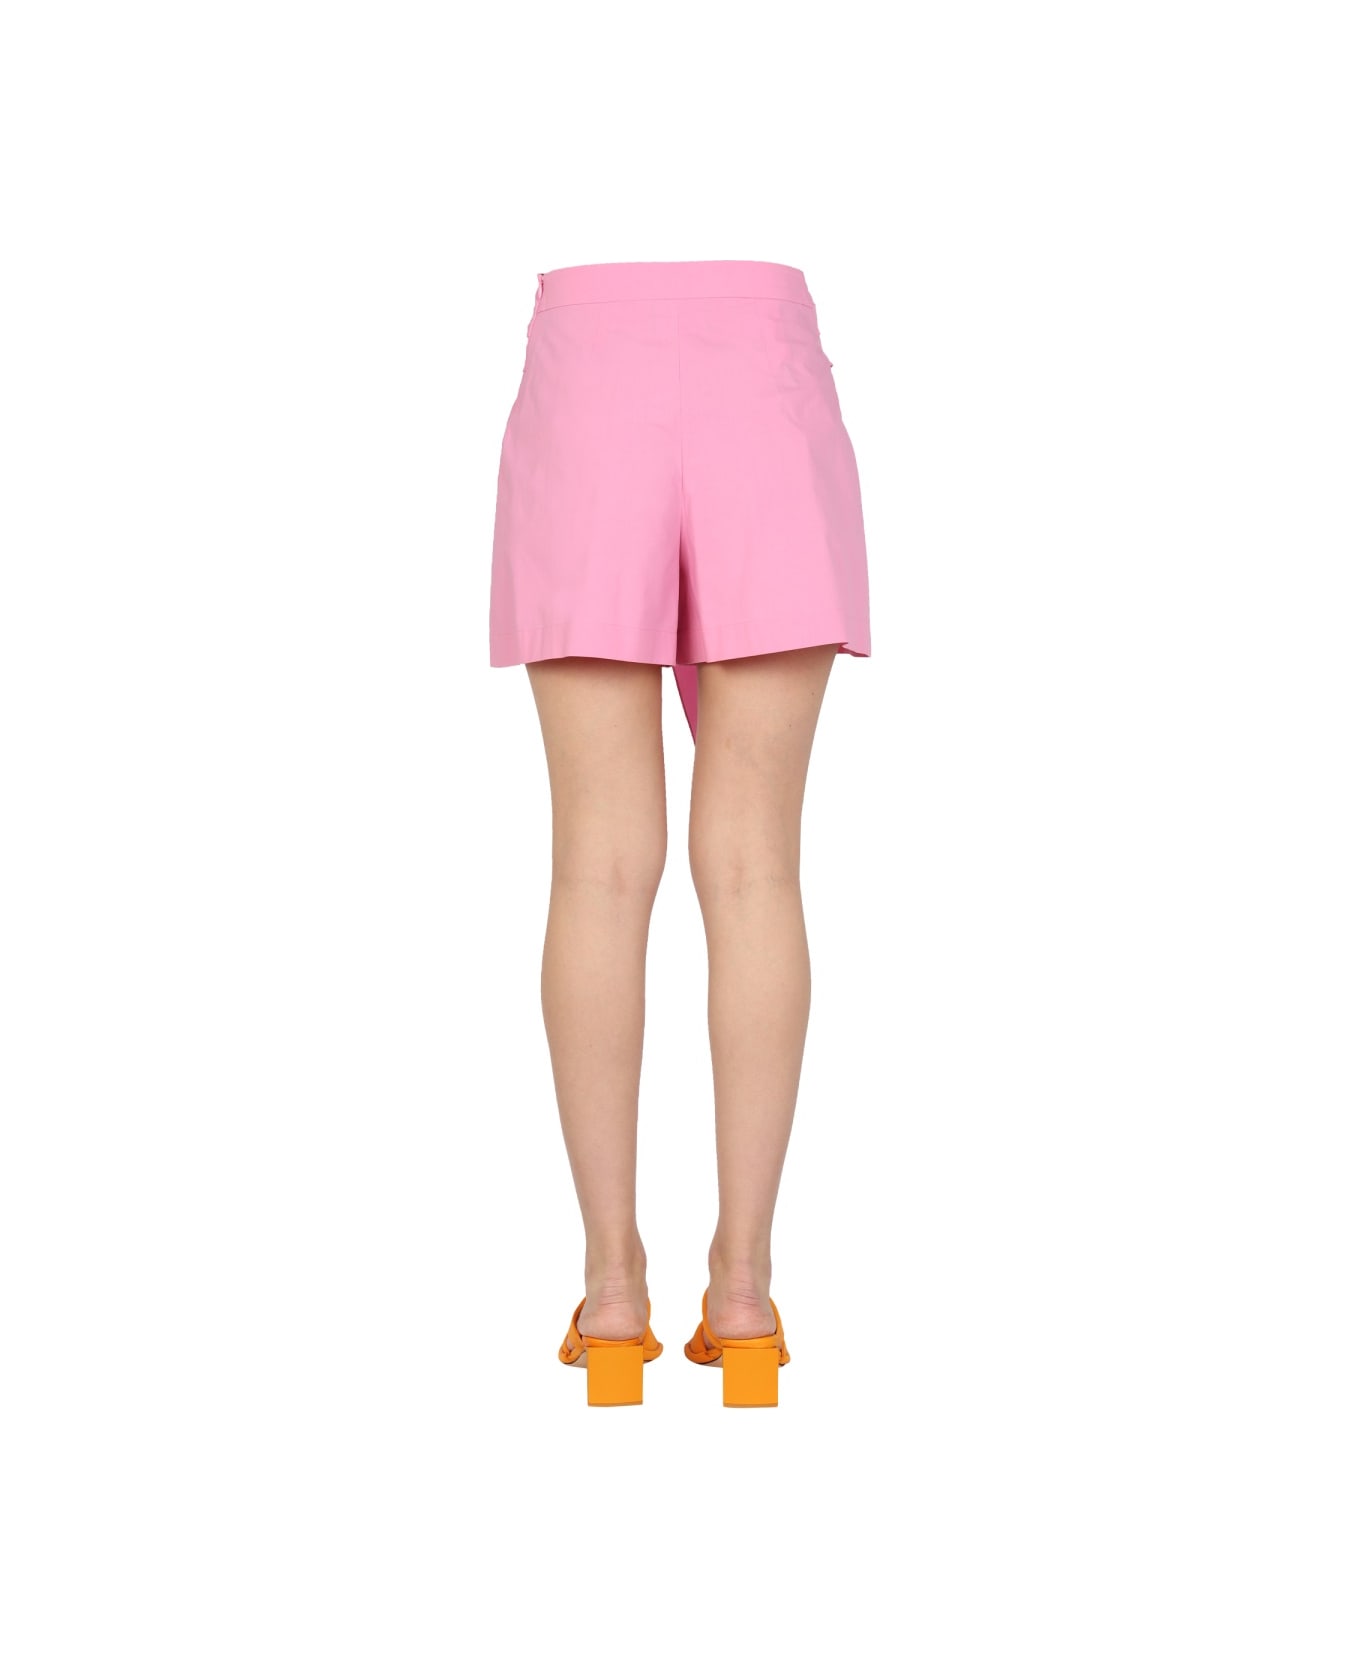 Boutique Moschino Belted Waist Shorts - PINK